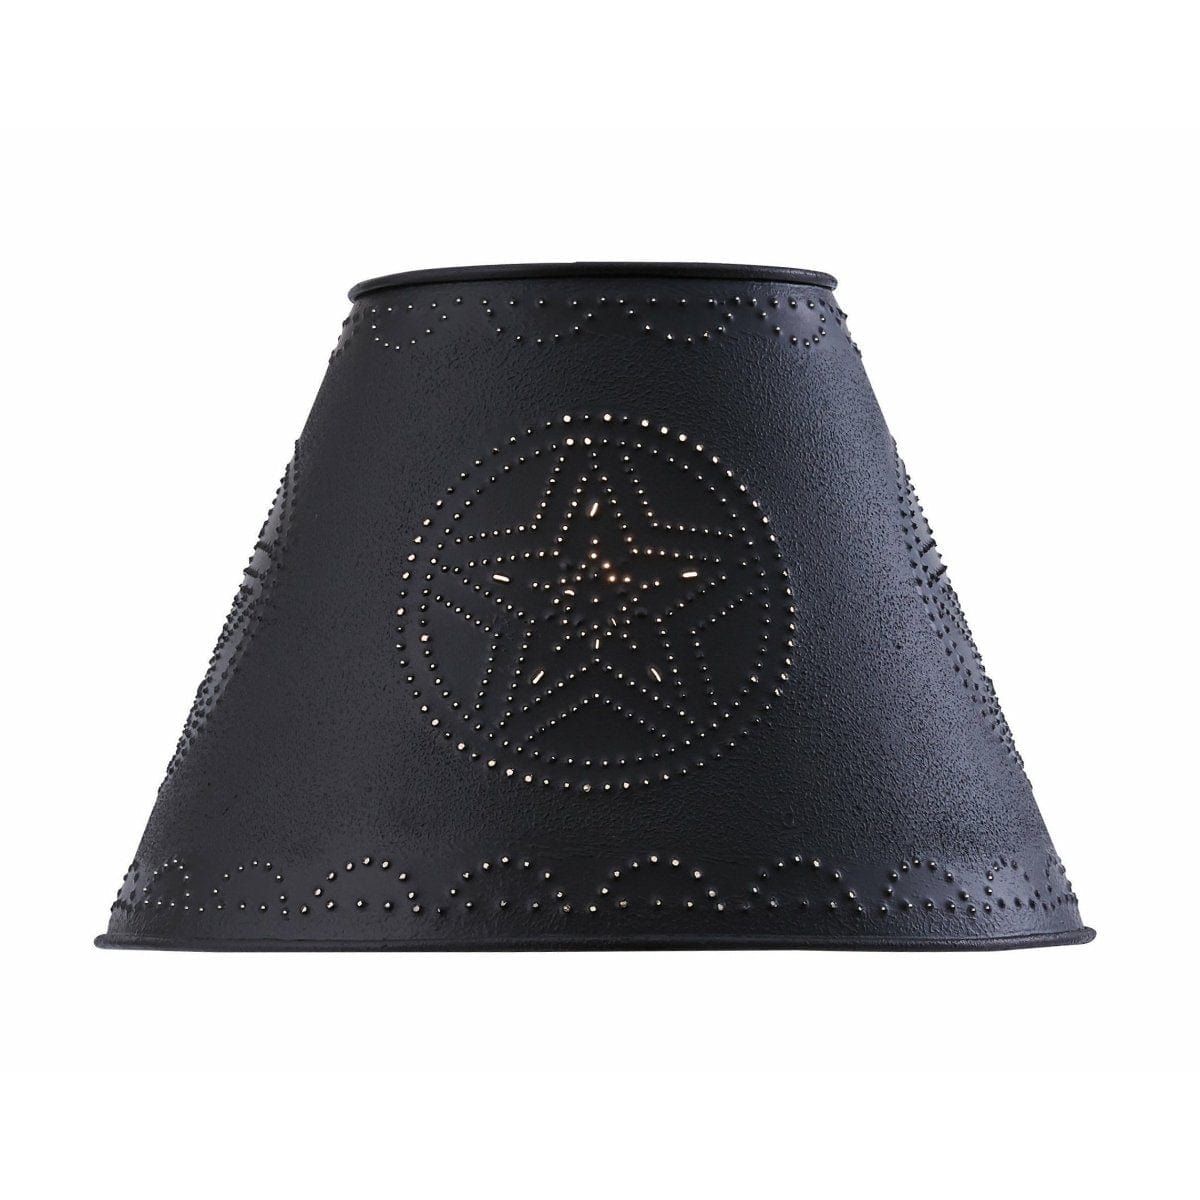 Star In Black Punched Tin Lamp Shade 12" Diameter-Park Designs-The Village Merchant